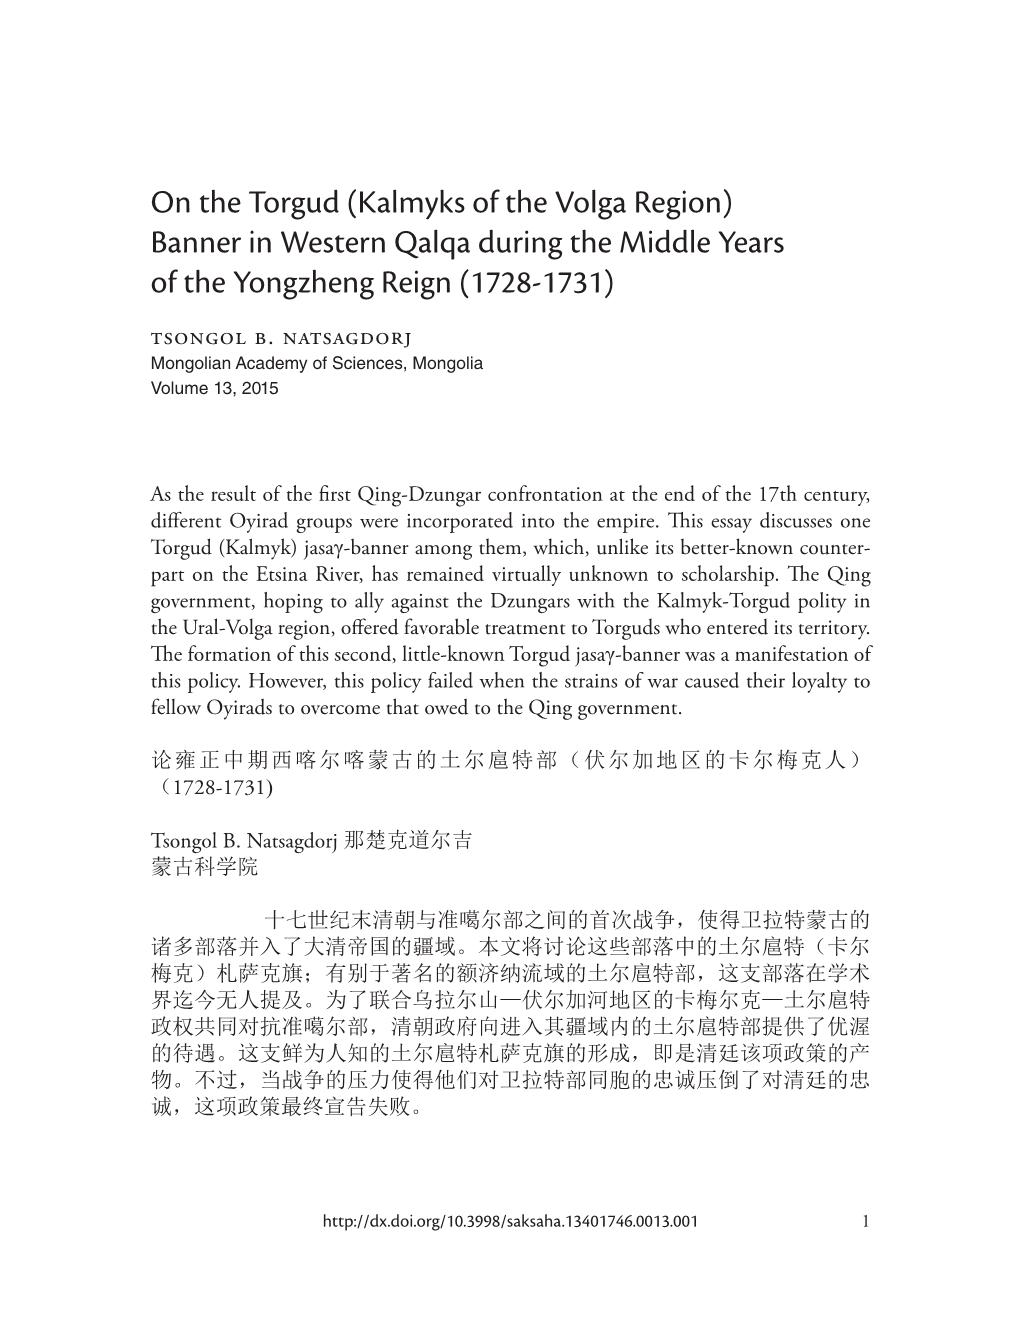 On the Torgud (Kalmyks of the Volga Region) Banner in Western Qalqa During the Middle Years of the Yongzheng Reign (1728-­1731)